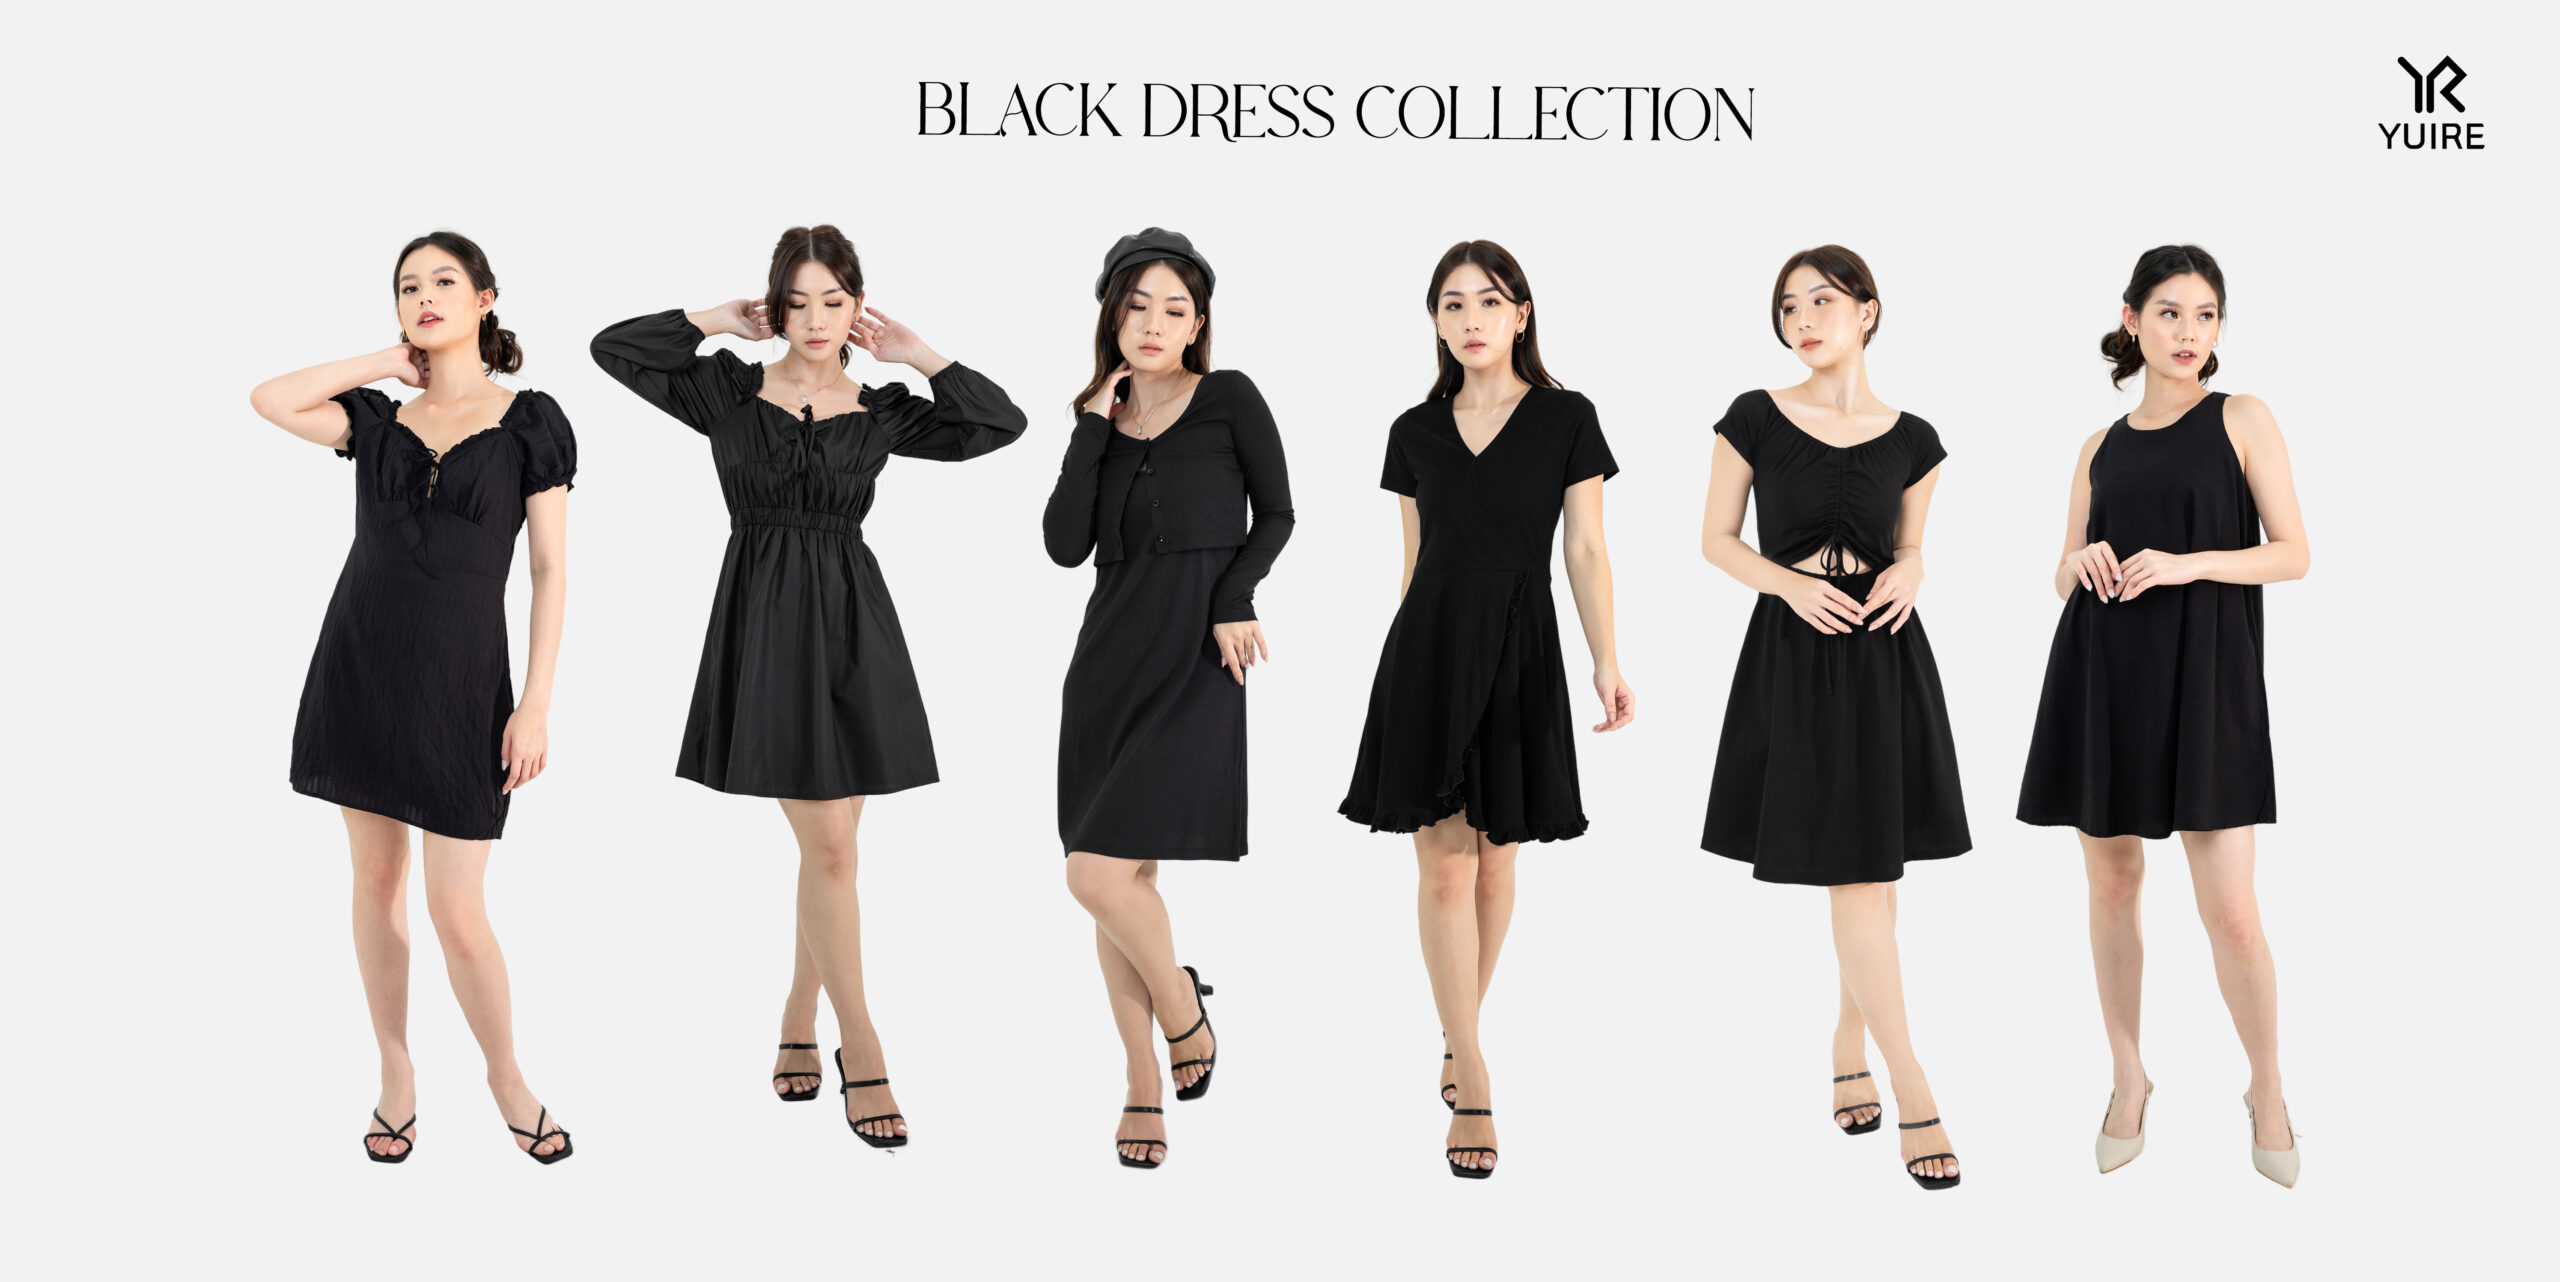 BLACK DRESS COLLECTION